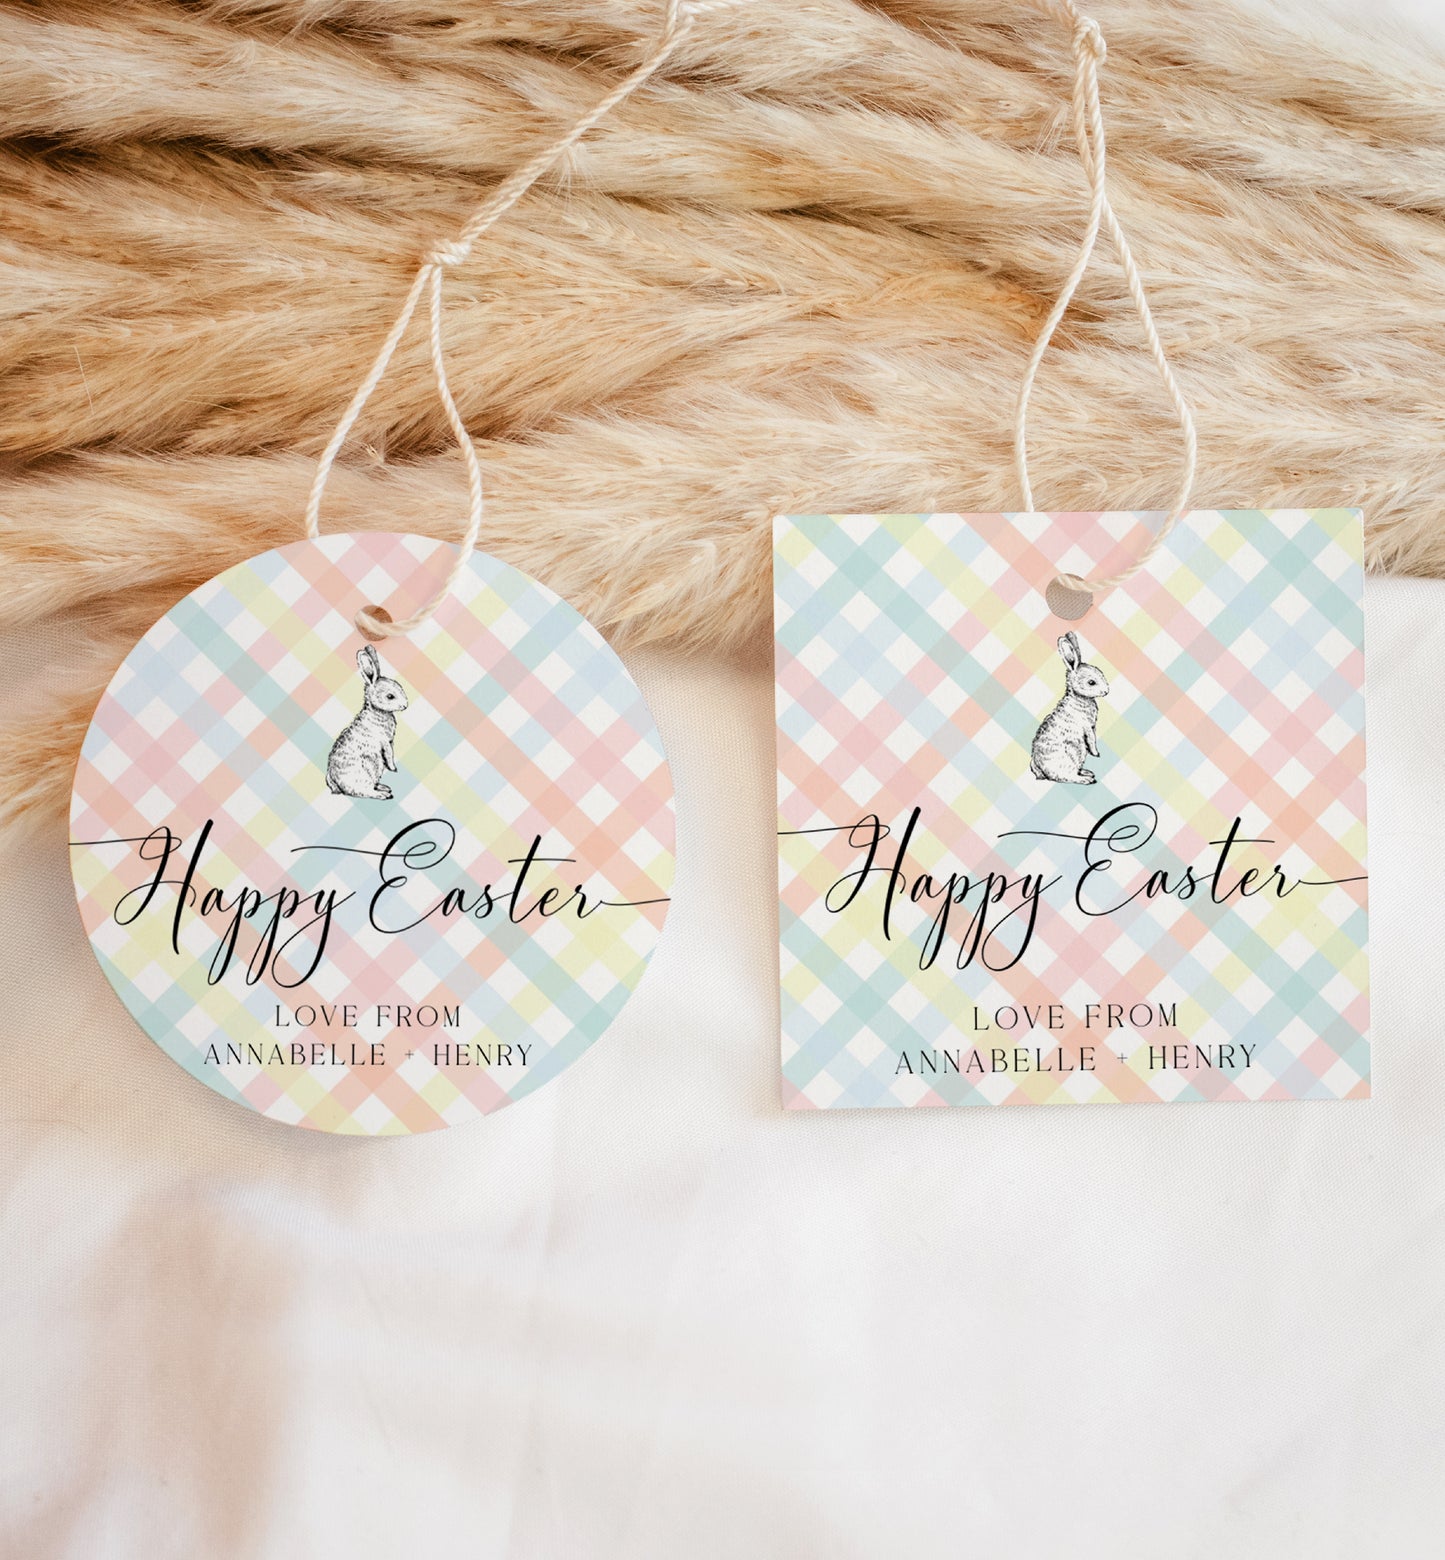 Printable Happy Easter Gift Tag Template, Easter Hunt Tag, Easter Basket, Easter Treat Tag, Easter Brunch, Easter Thank You, Multi Gingham